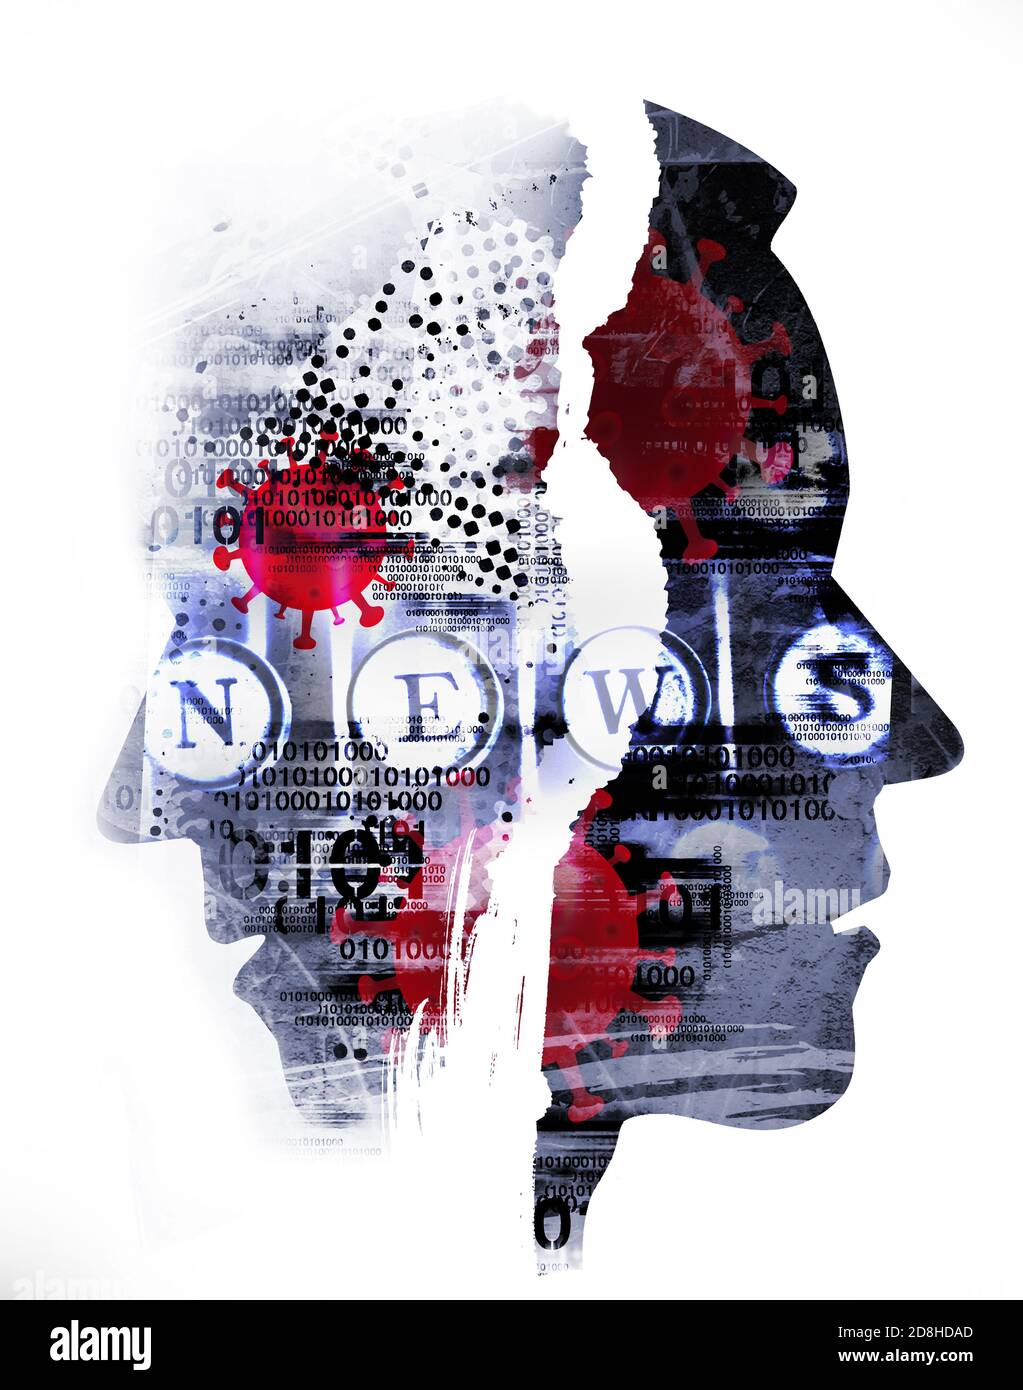 Bad news, Pandemic of coronavirus,. Male heads, grunge expressive composition of stylized silhouettes shown in profile with NEWS lettering. Stock Photo